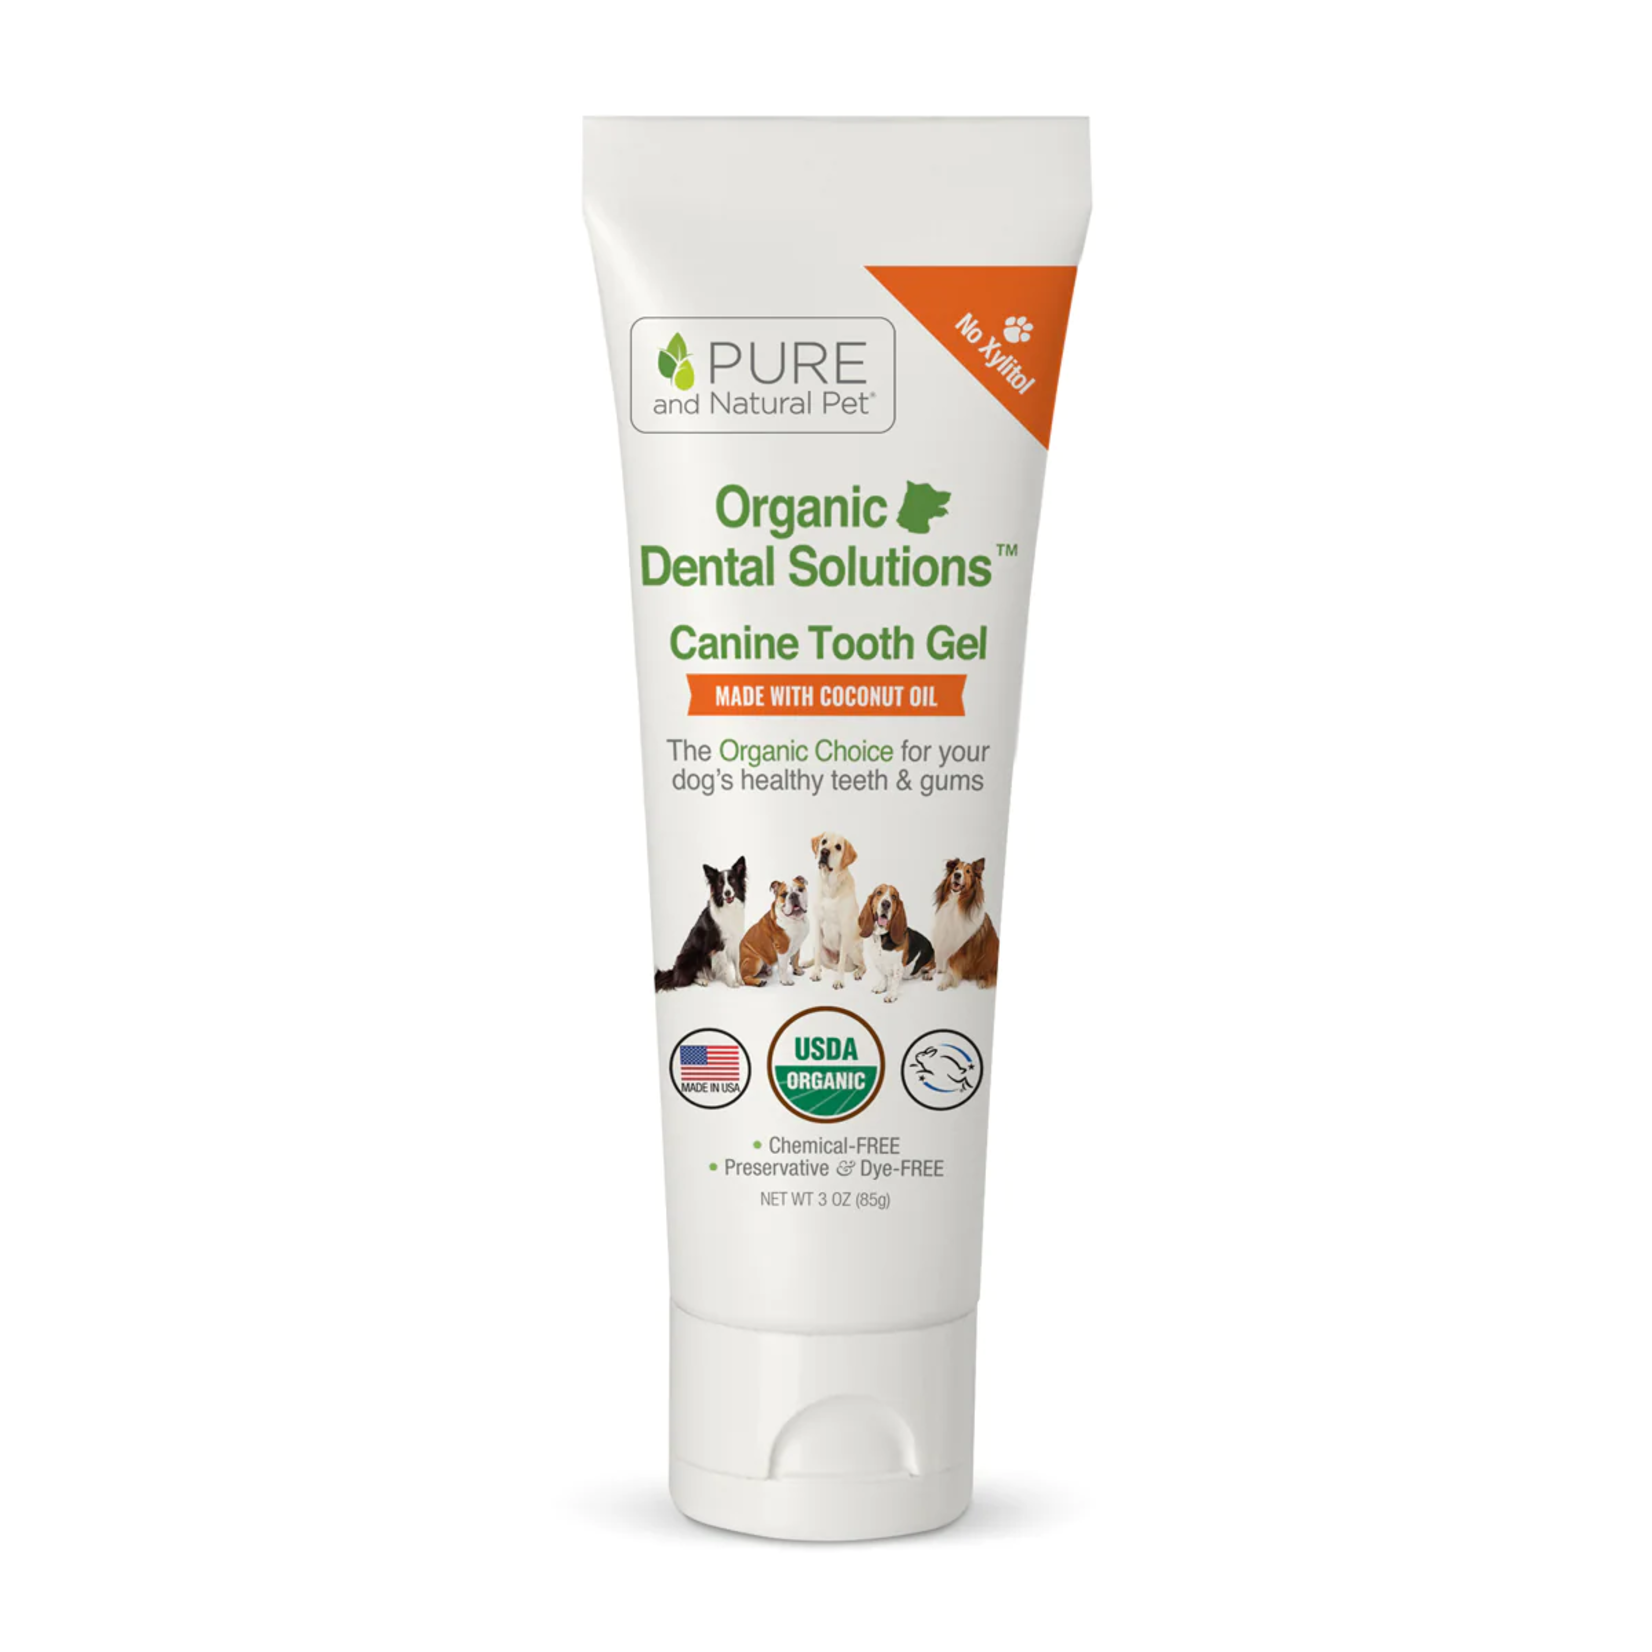 Pure and Natural Pure and Natural Pet - Organic Dental Solutions Canine Tooth Gel